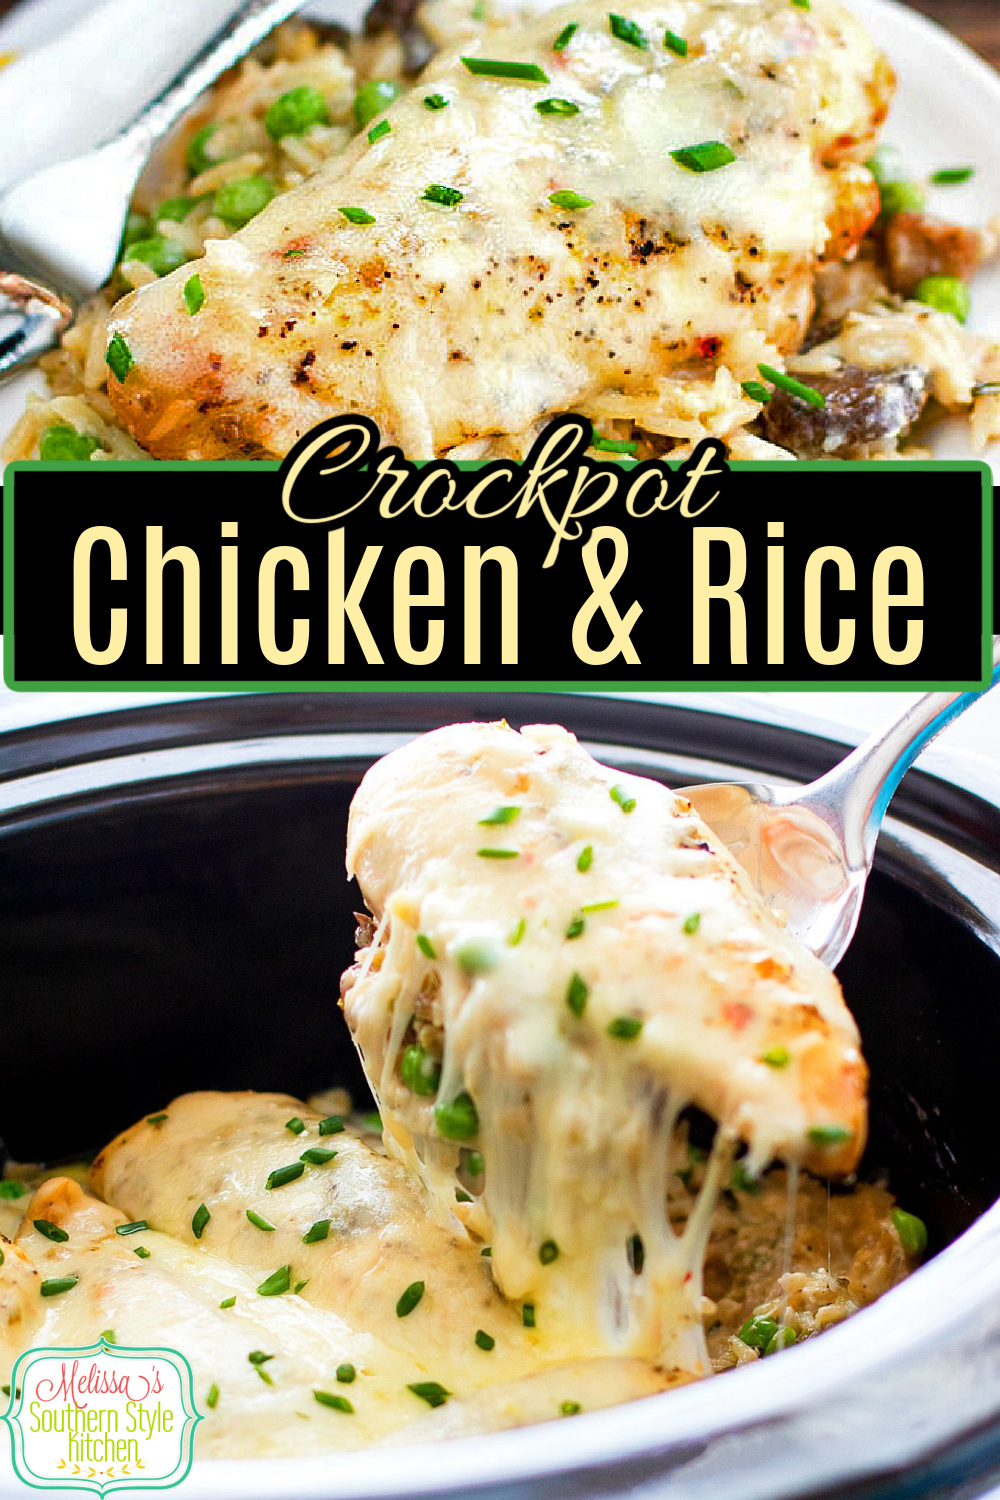 Make this Crockpot Chicken and Rice for dinner tonight #chickenrecipes #chickenandrice #crockpotrecipes #slowcooking #ricerecipes #easychickenbreastrecipes #southernrecipes #southernfood #dinner via @melissasssk